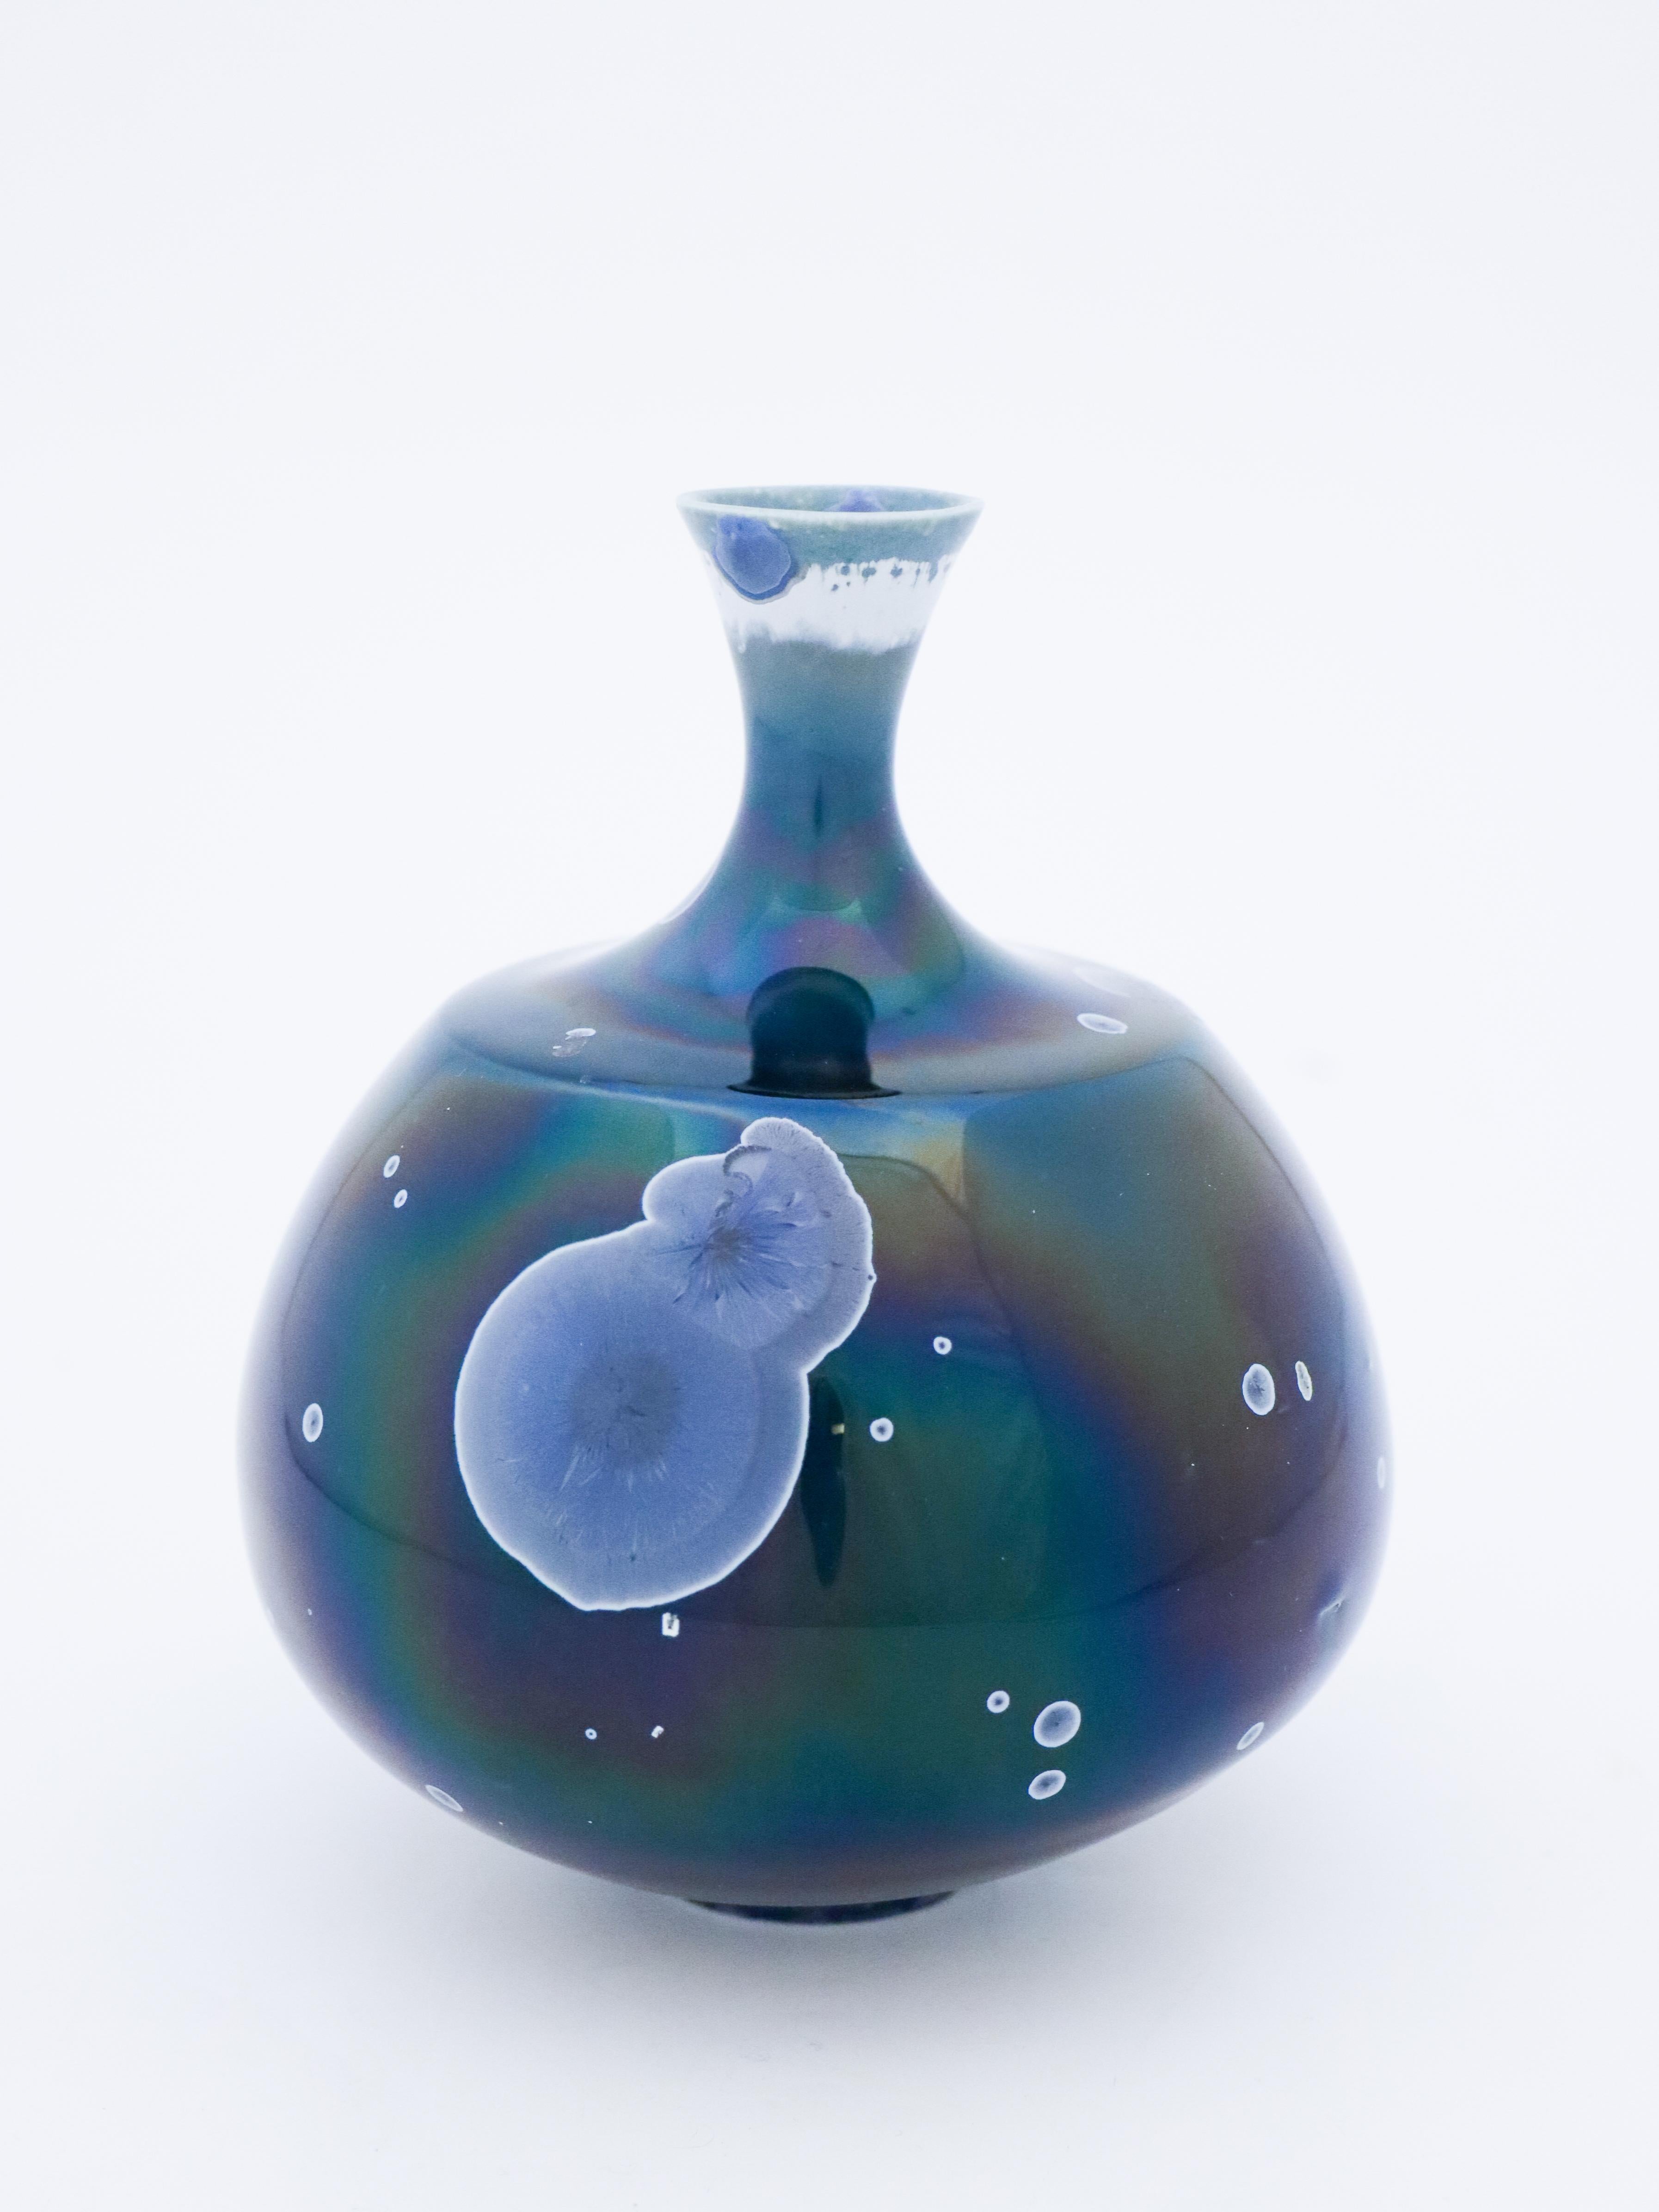 A unique vase in a Dark Blue metallic-tone with a lovely crystalline glaze created by the contemporary Swedish artist Isak Isaksson in his own studio. The vase is 15.5 cm (6.2